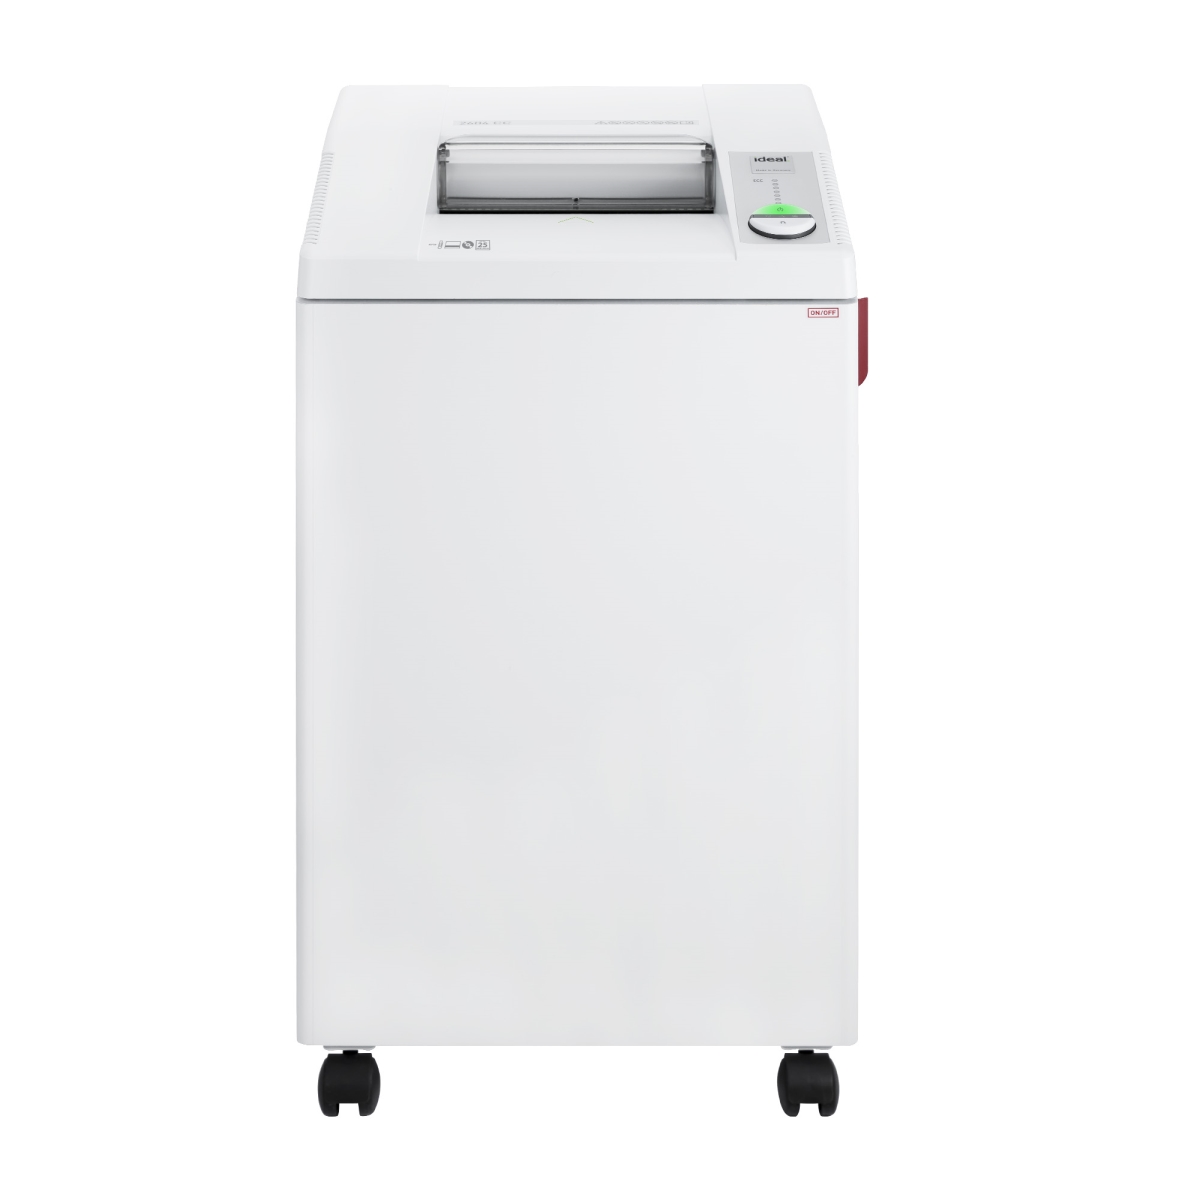 Picture of ideal. 2604 cross-cut paper shredder  P-4 security level  designed for 8-10 users  shreds 23-25 sheets at a time